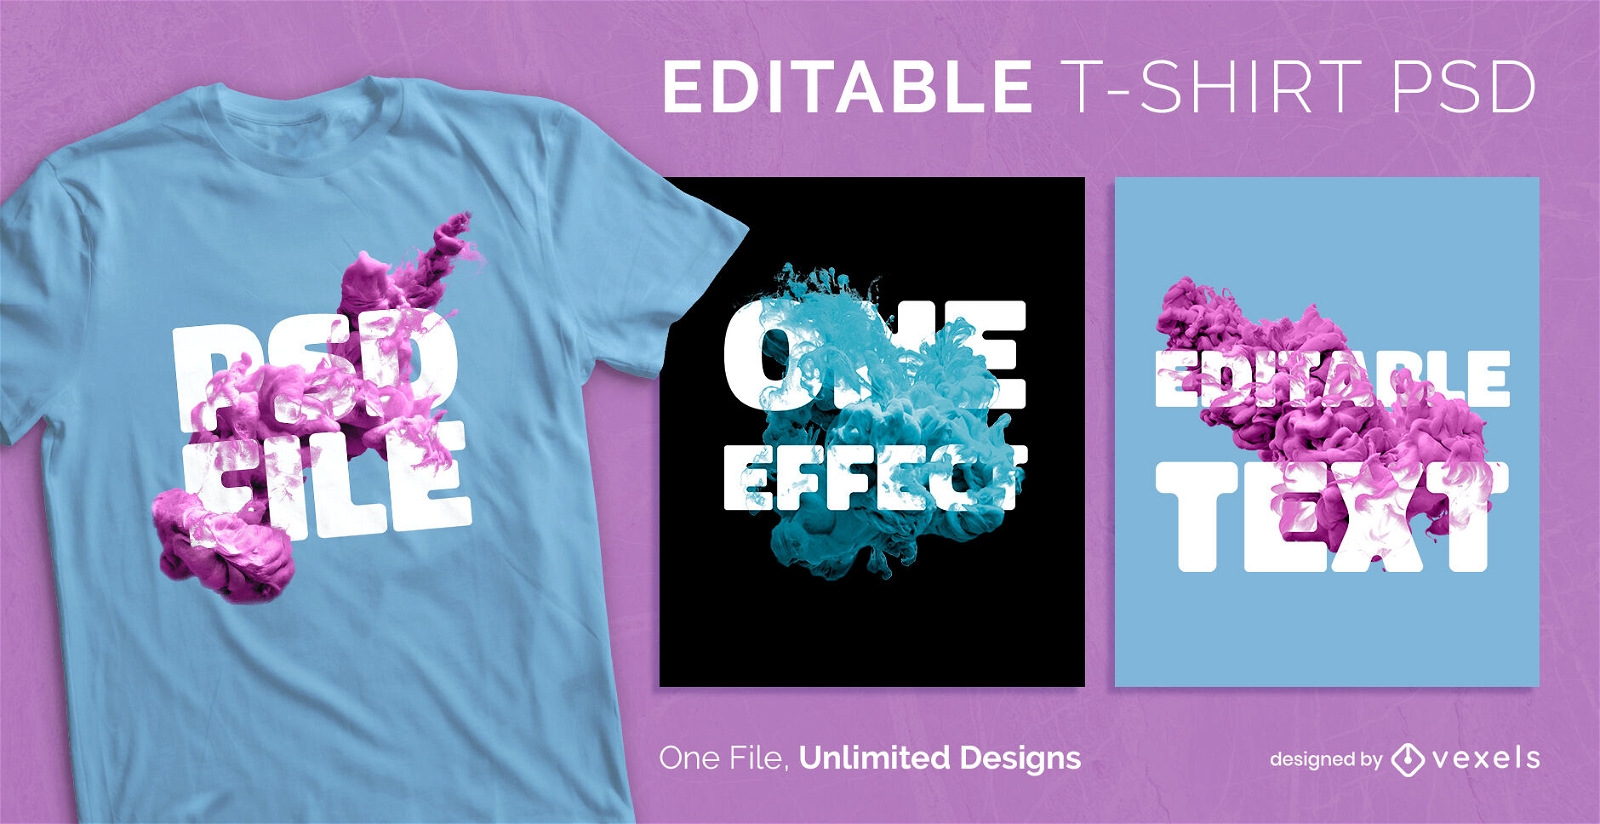 Colored smoke scalable t-shirt psd